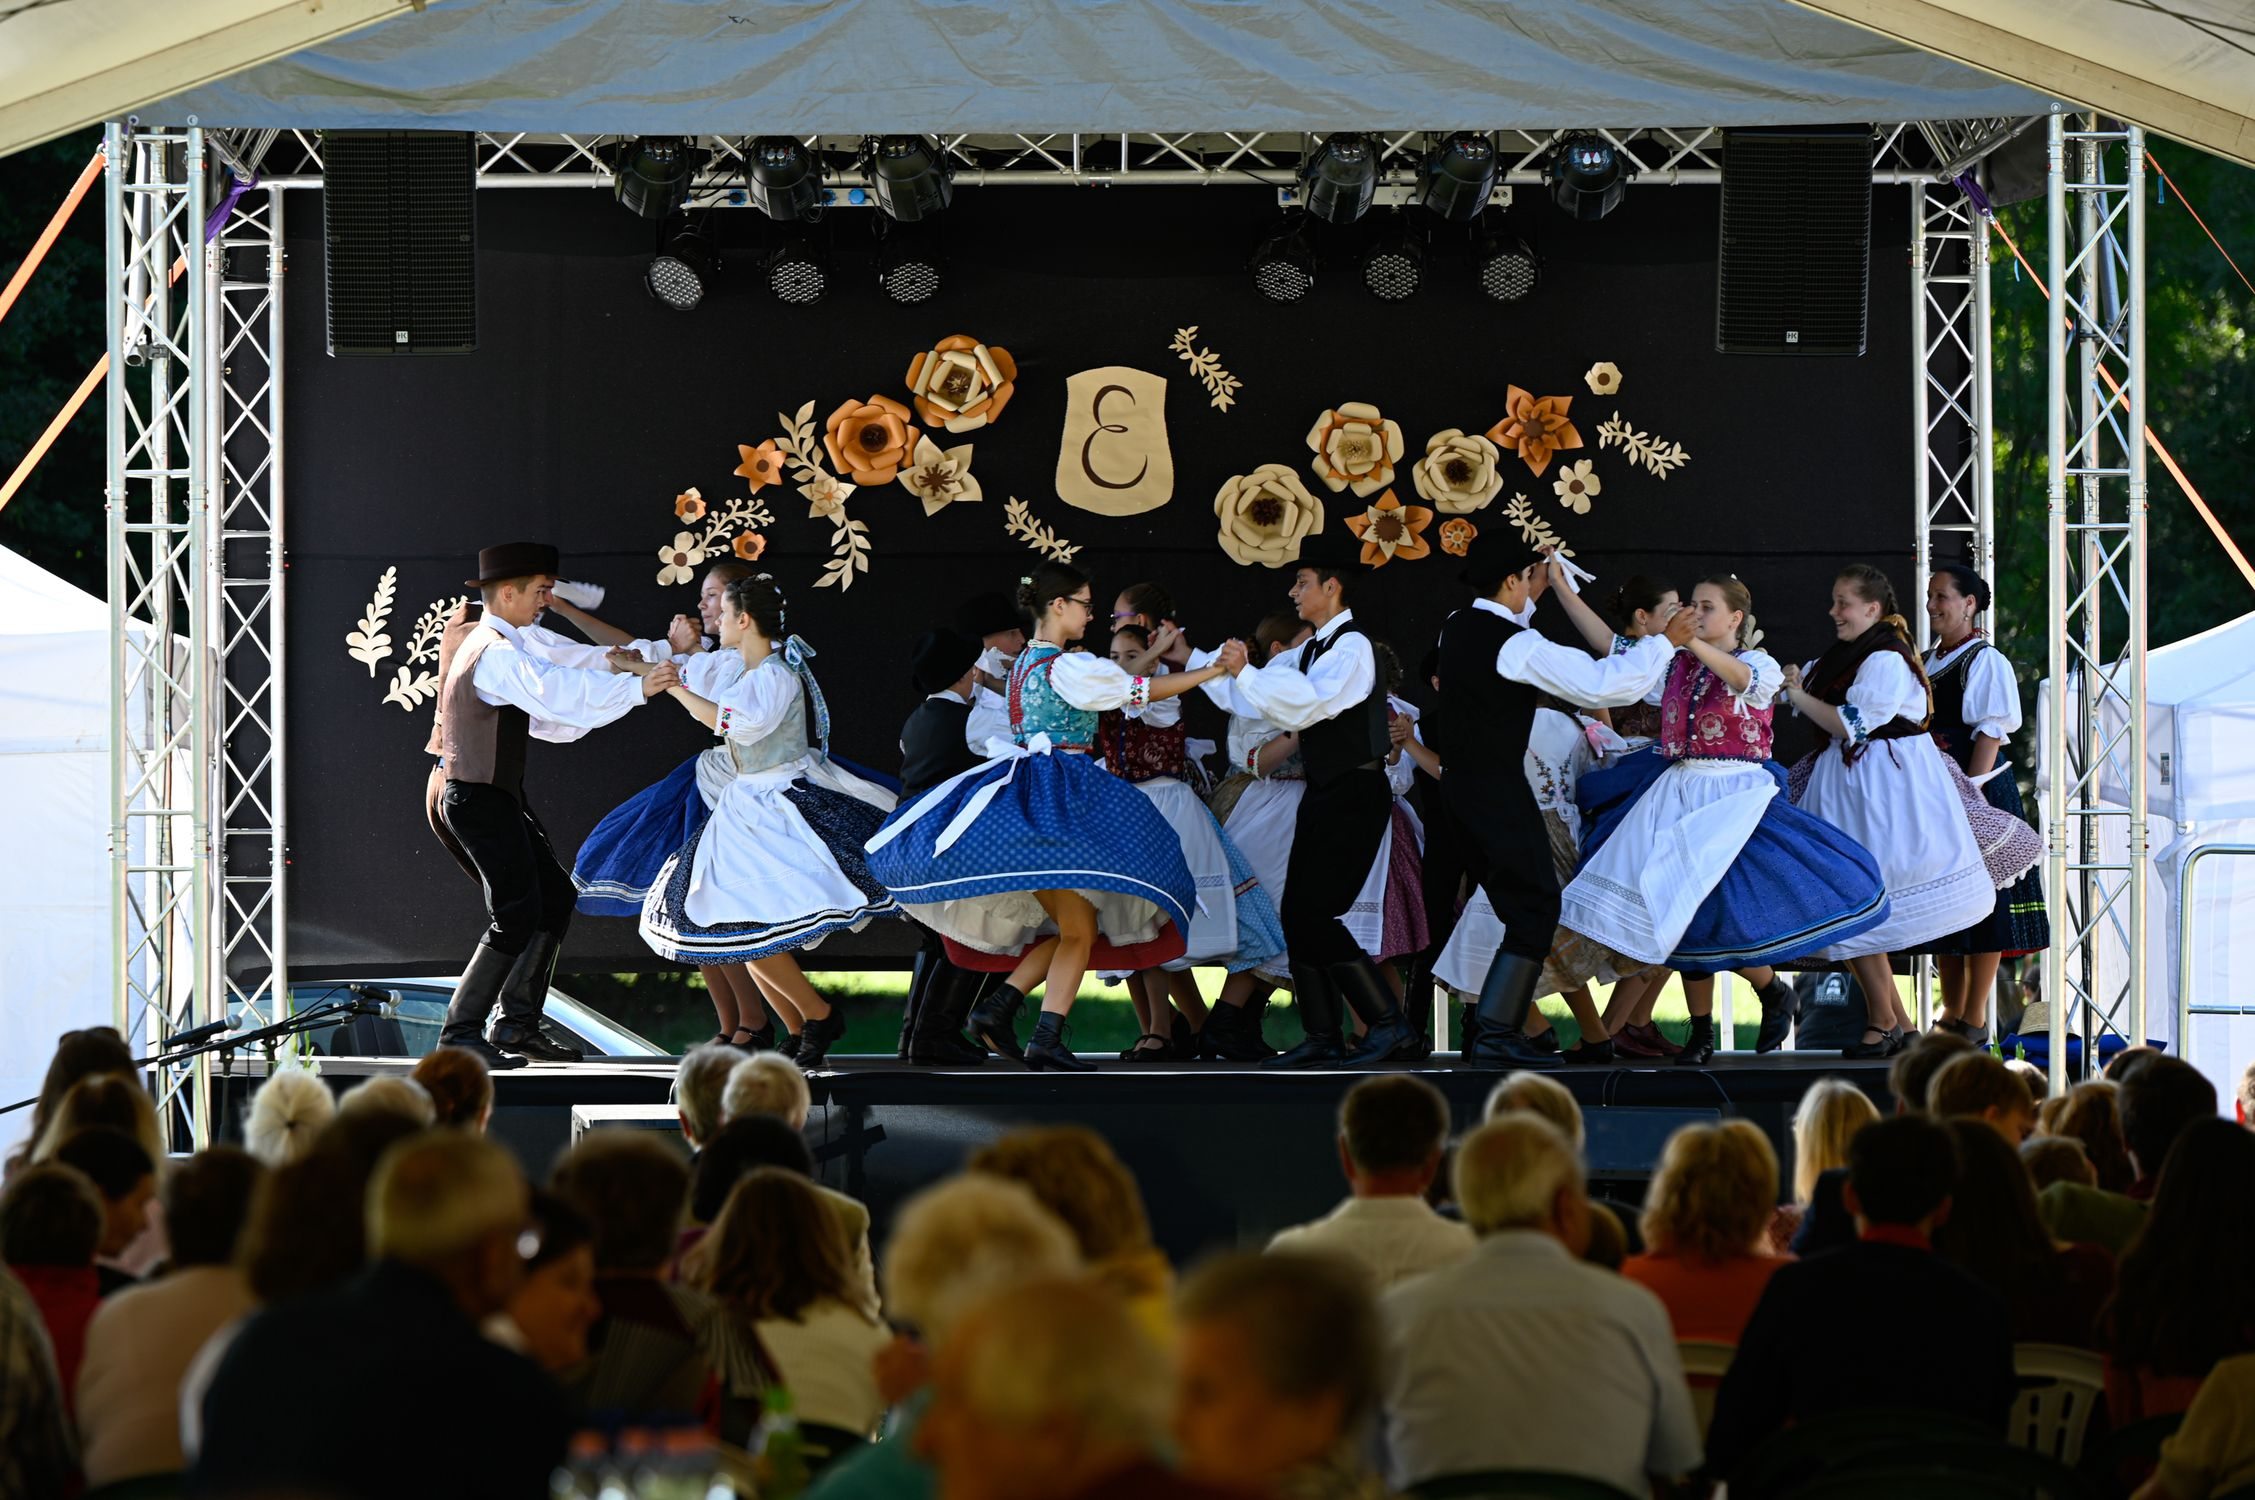 Hungarian folk dancers on the stage